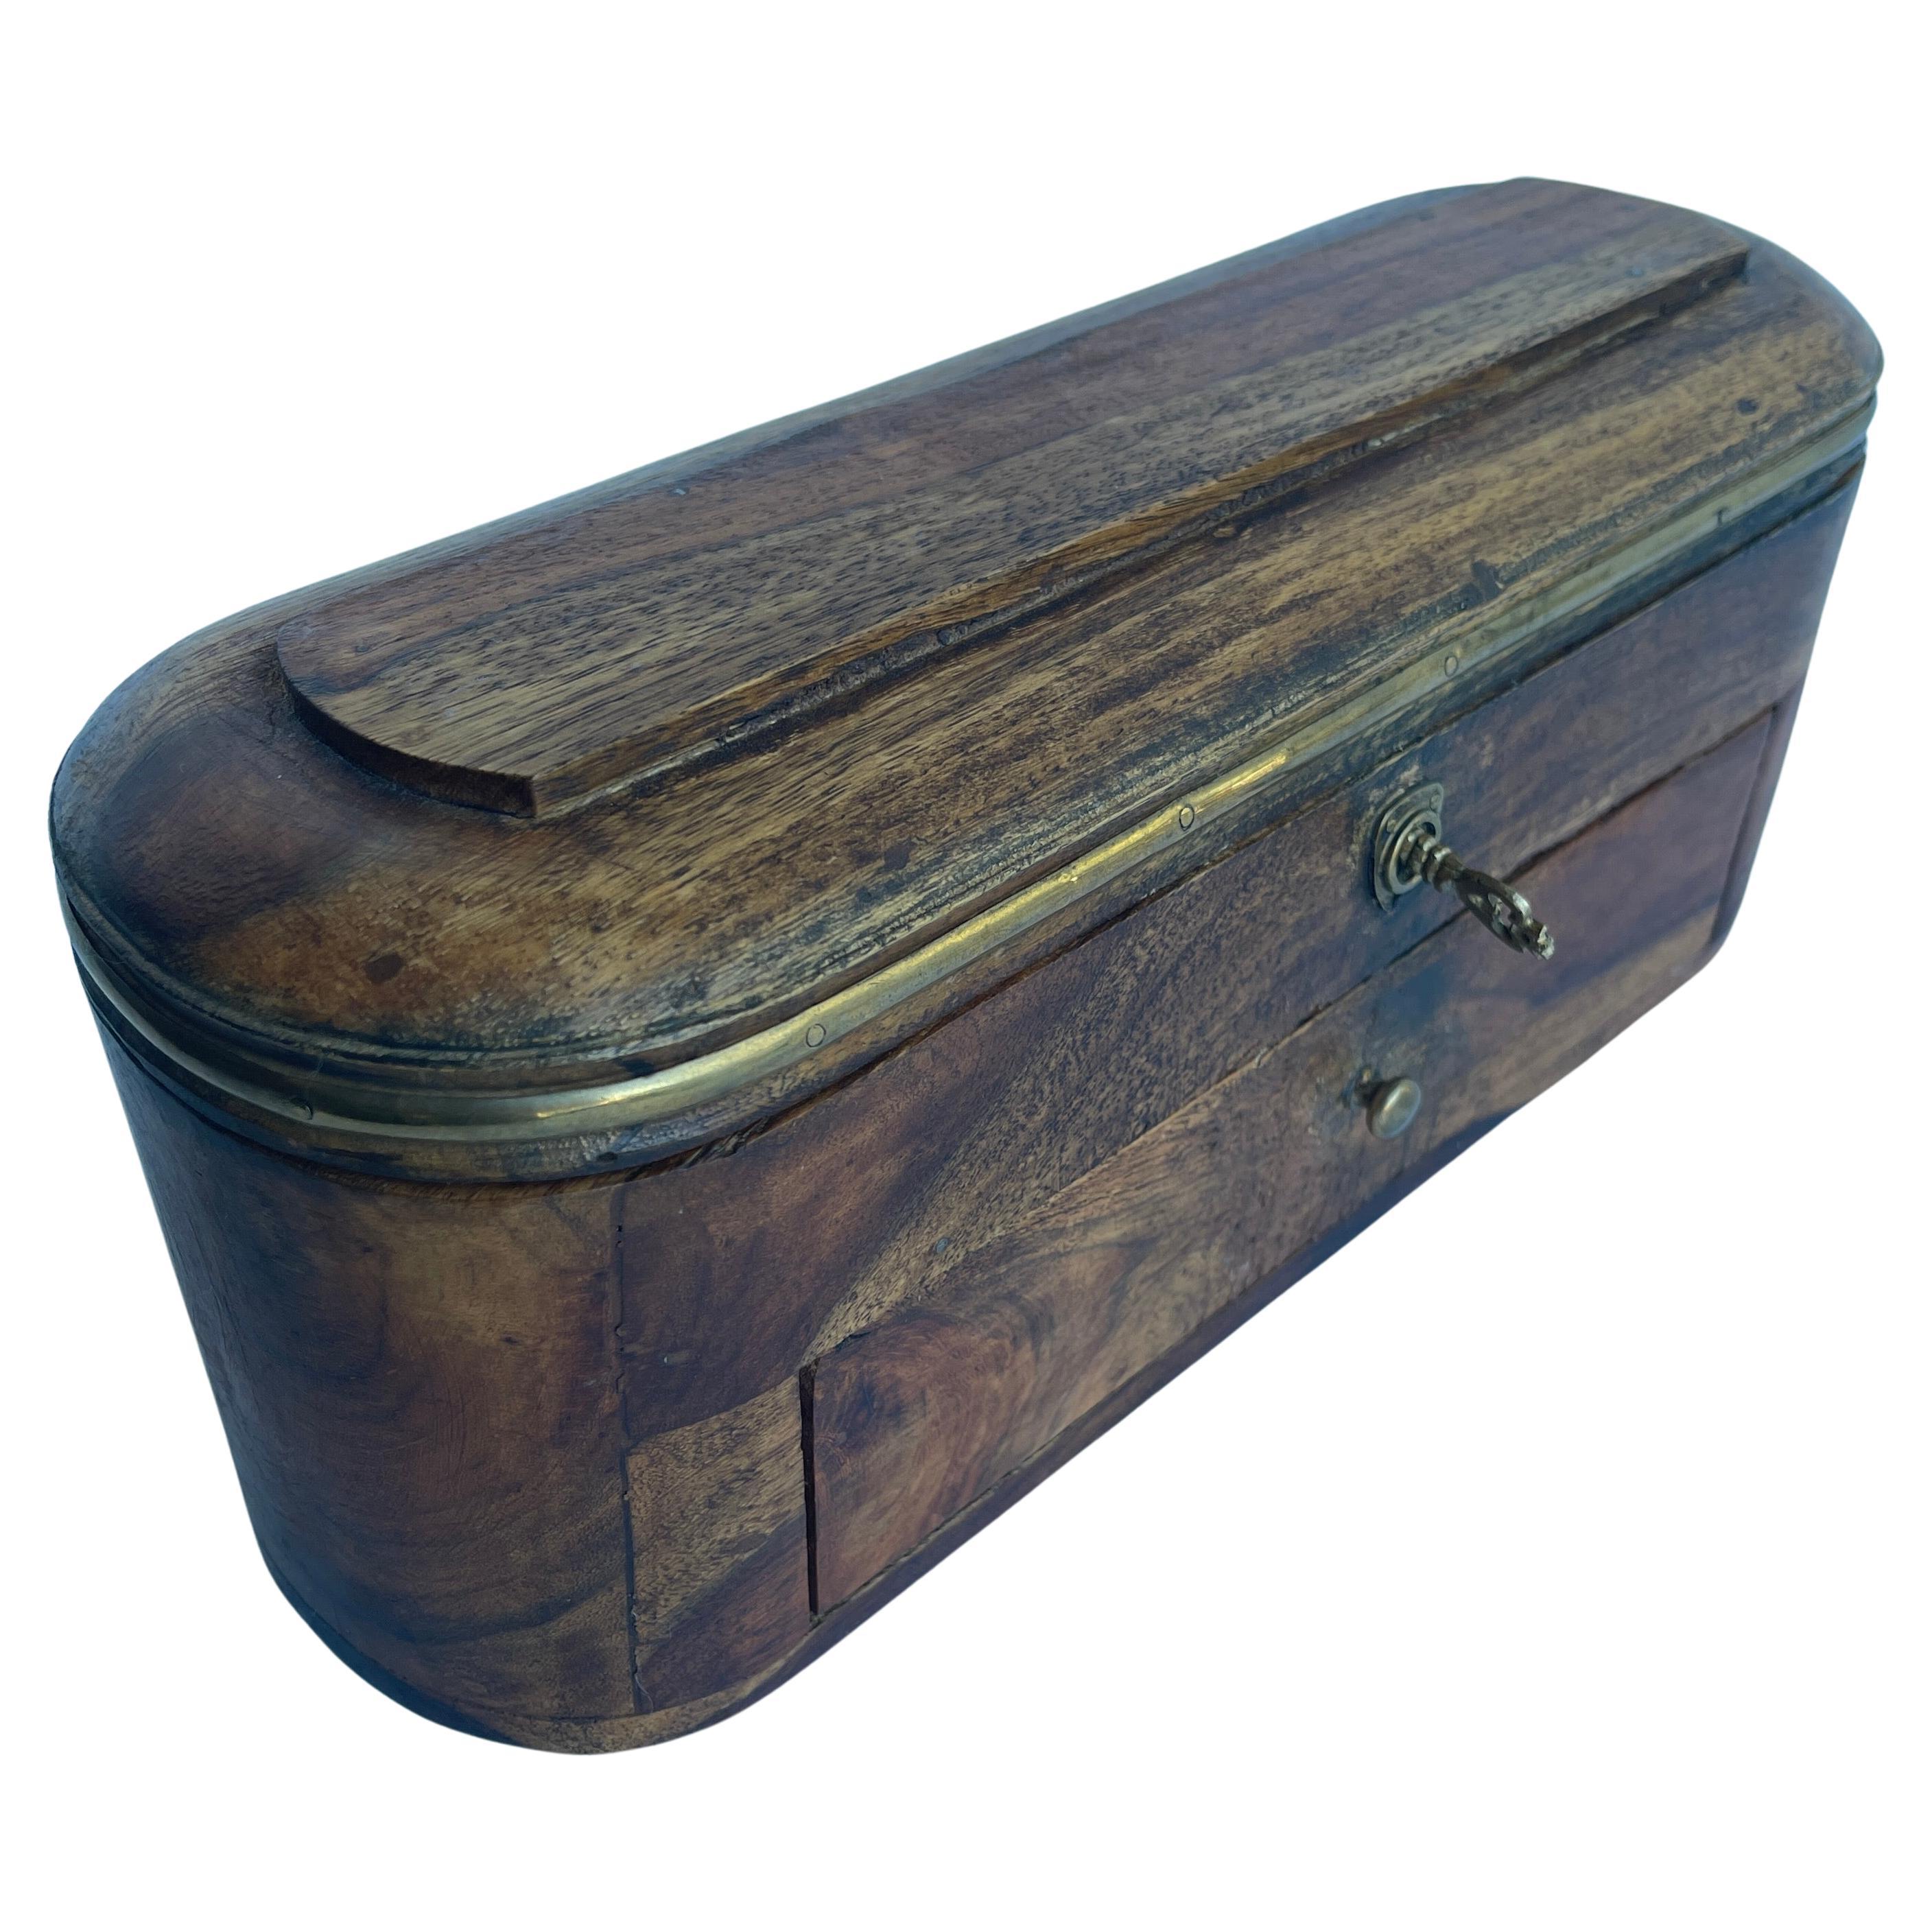 Vintage wood and brass trimmed box with lock and original hardware and key.
The curving corners, trimmed in aged brass patina, add to the character of this treasure box. Large enough to hold jewelry with a locked drawer or any collectibles and